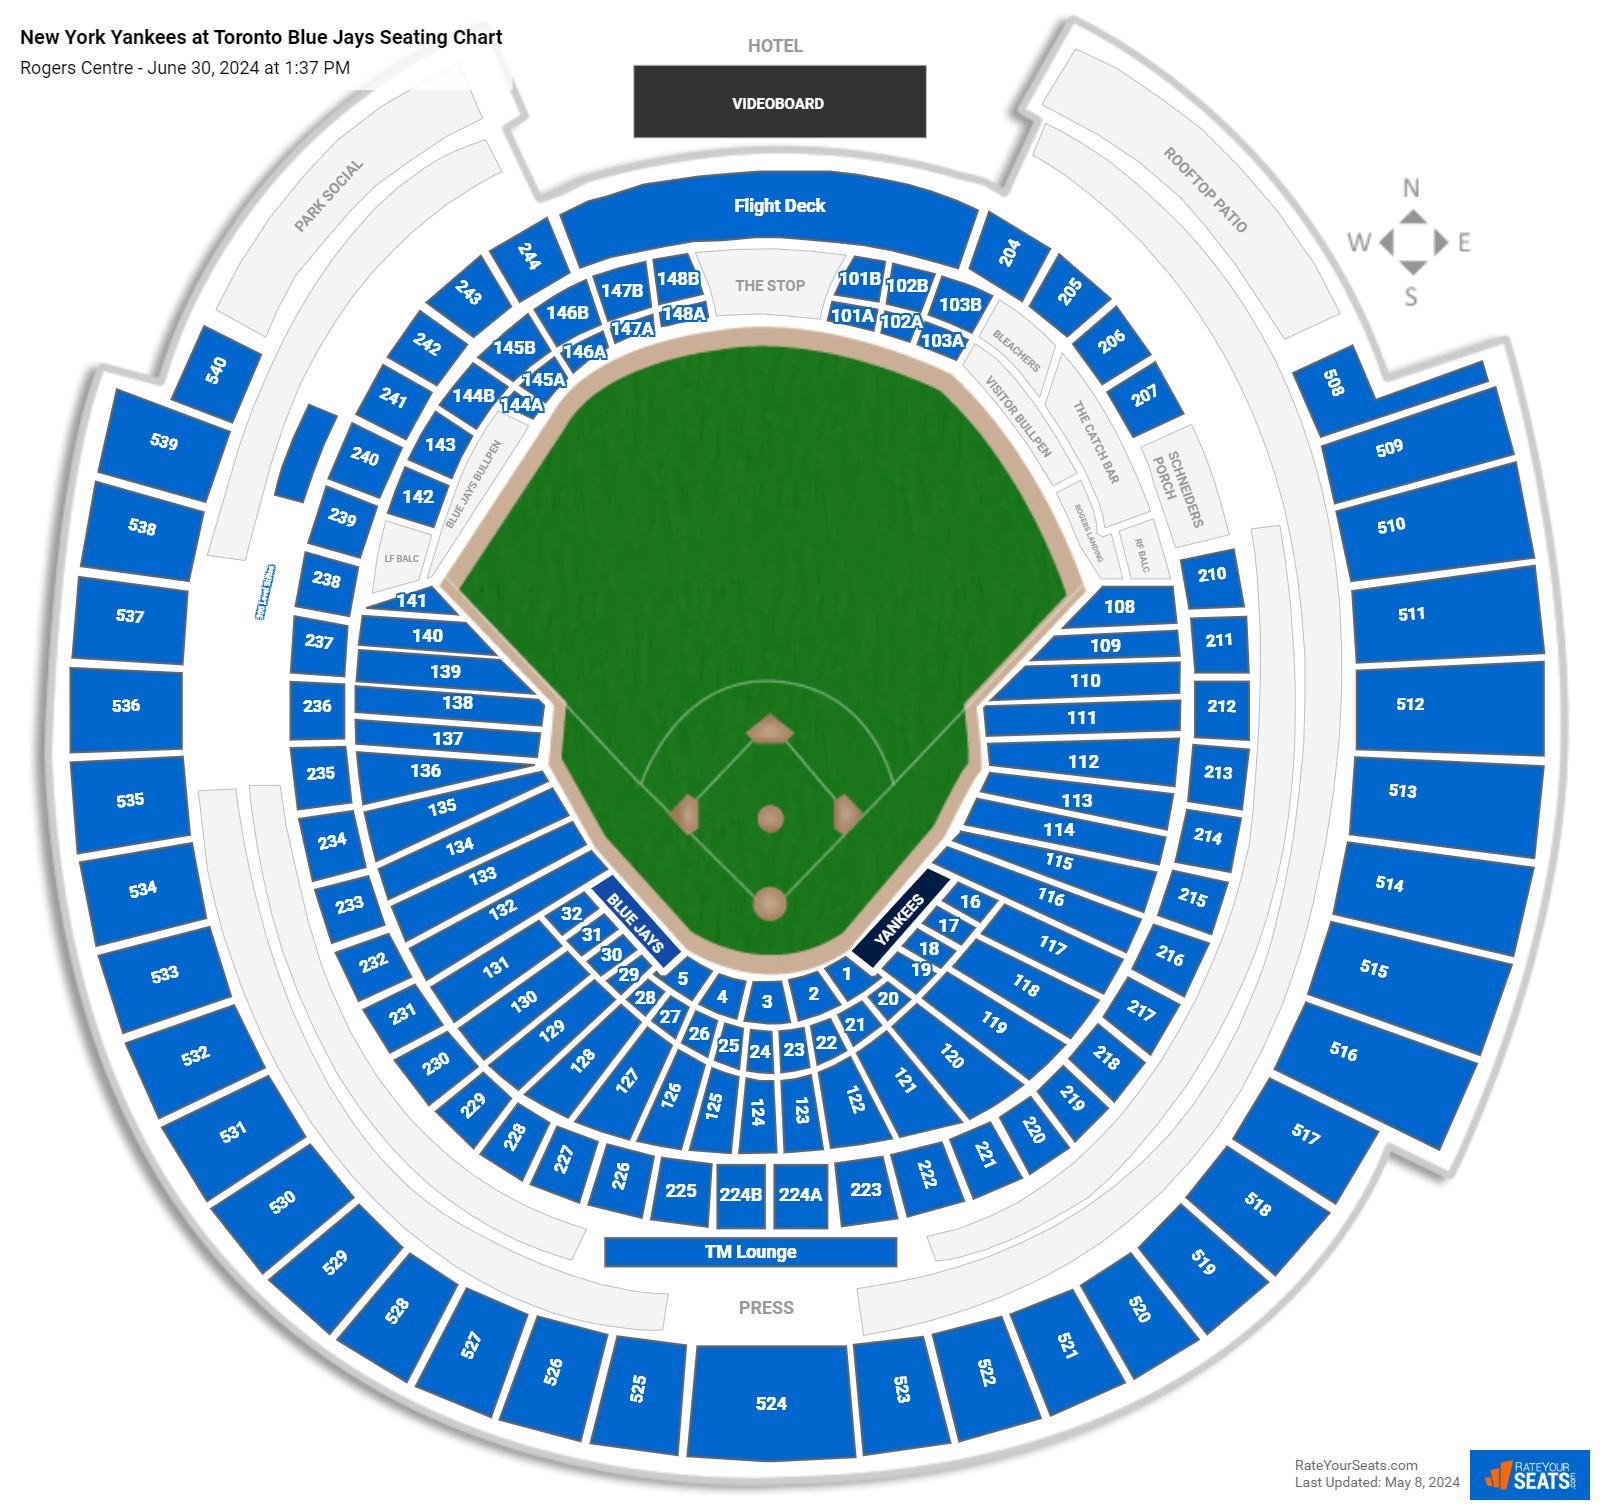 New York Yankees at Toronto Blue Jays seating chart Rogers Centre